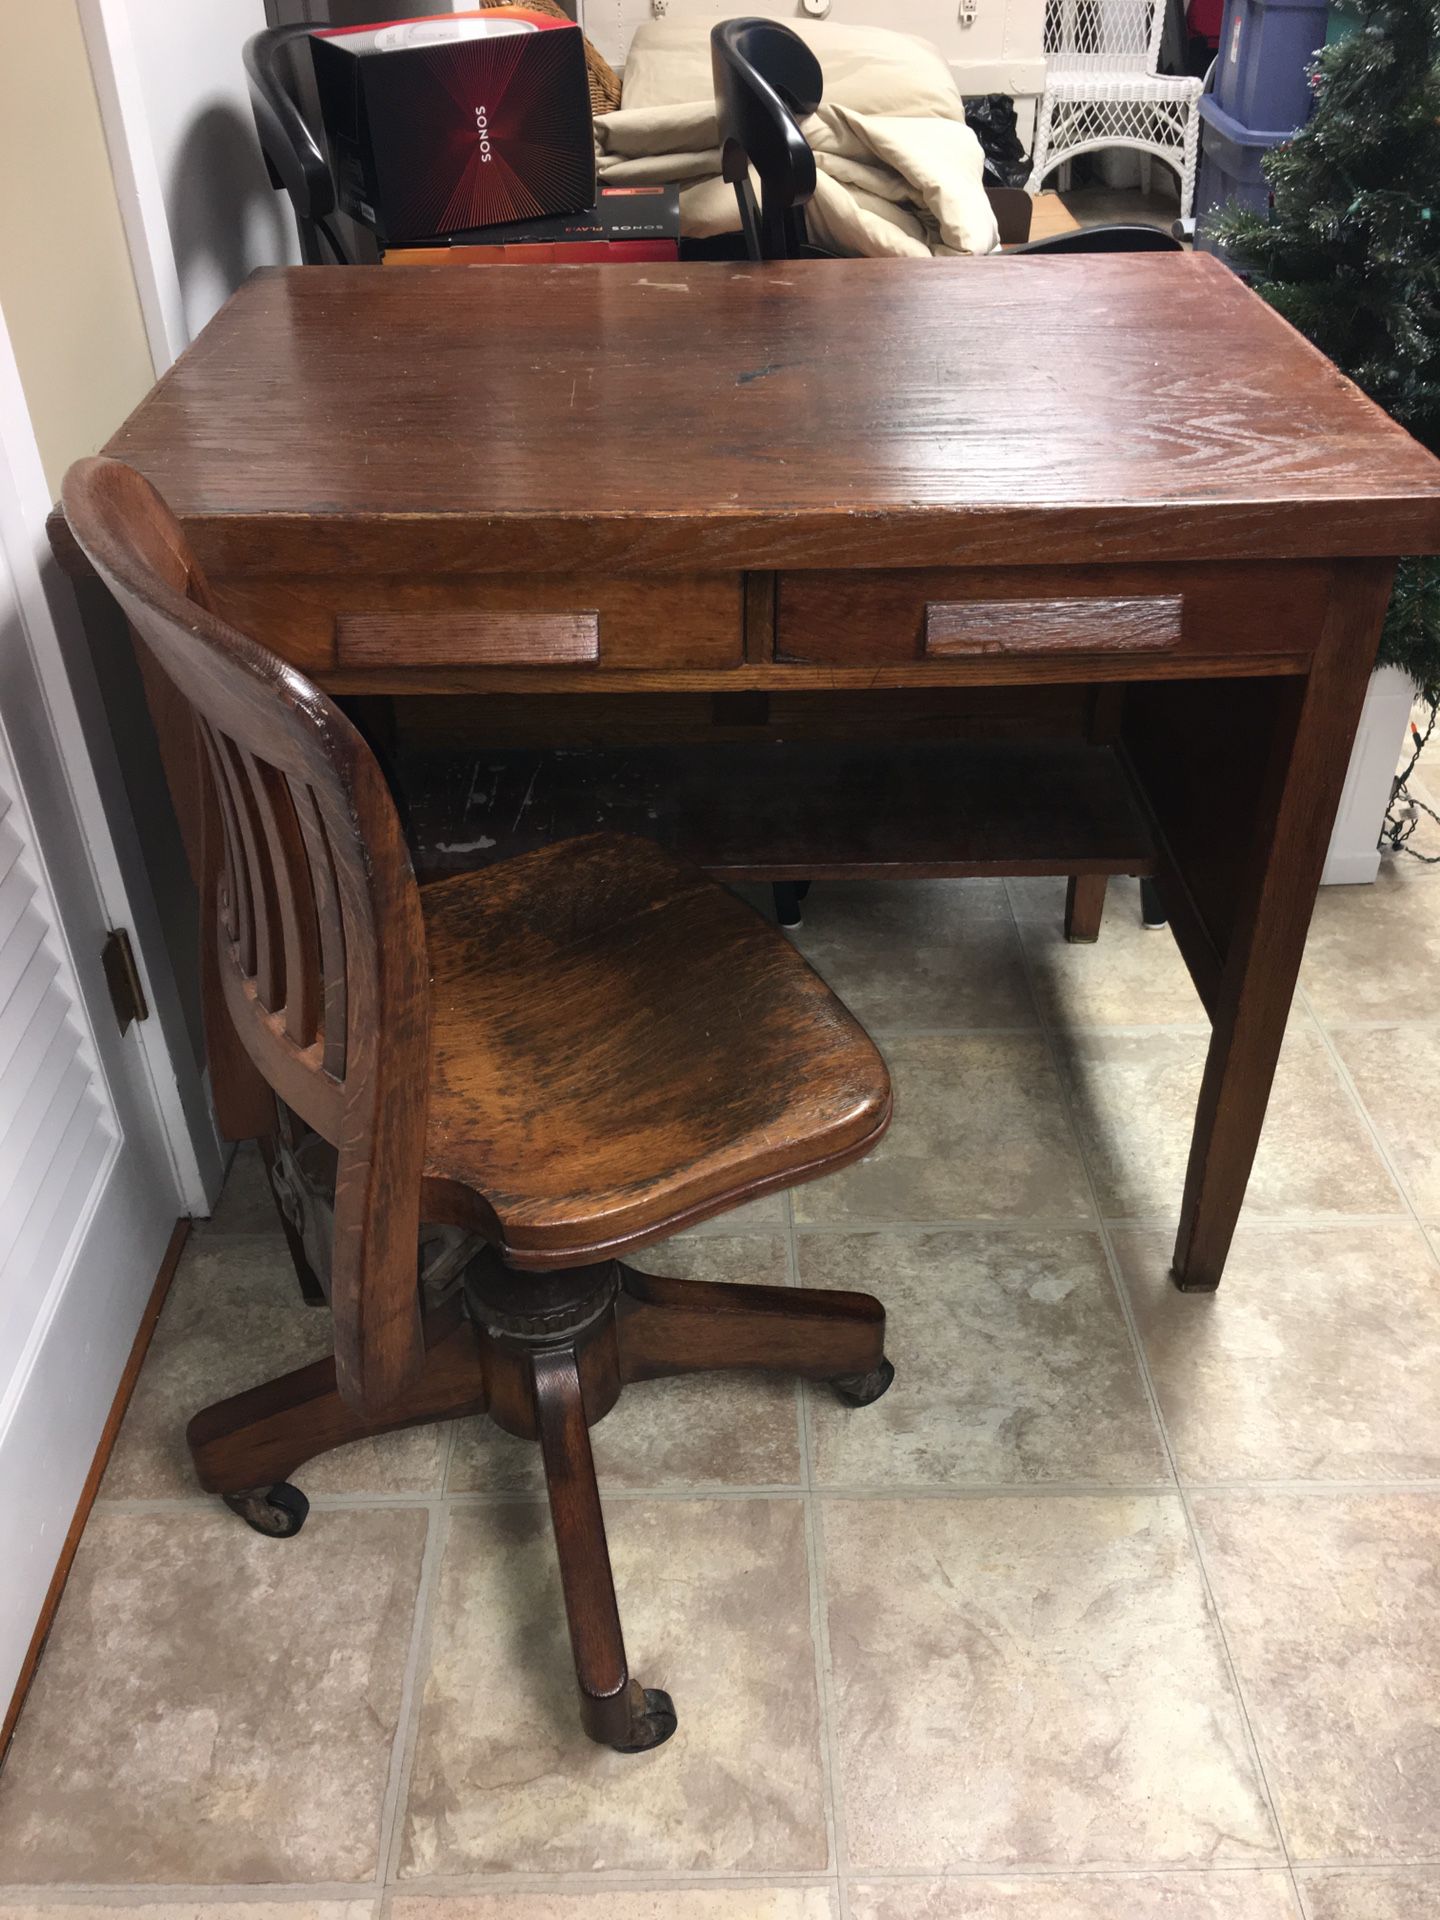 Antique furniture table and chair set